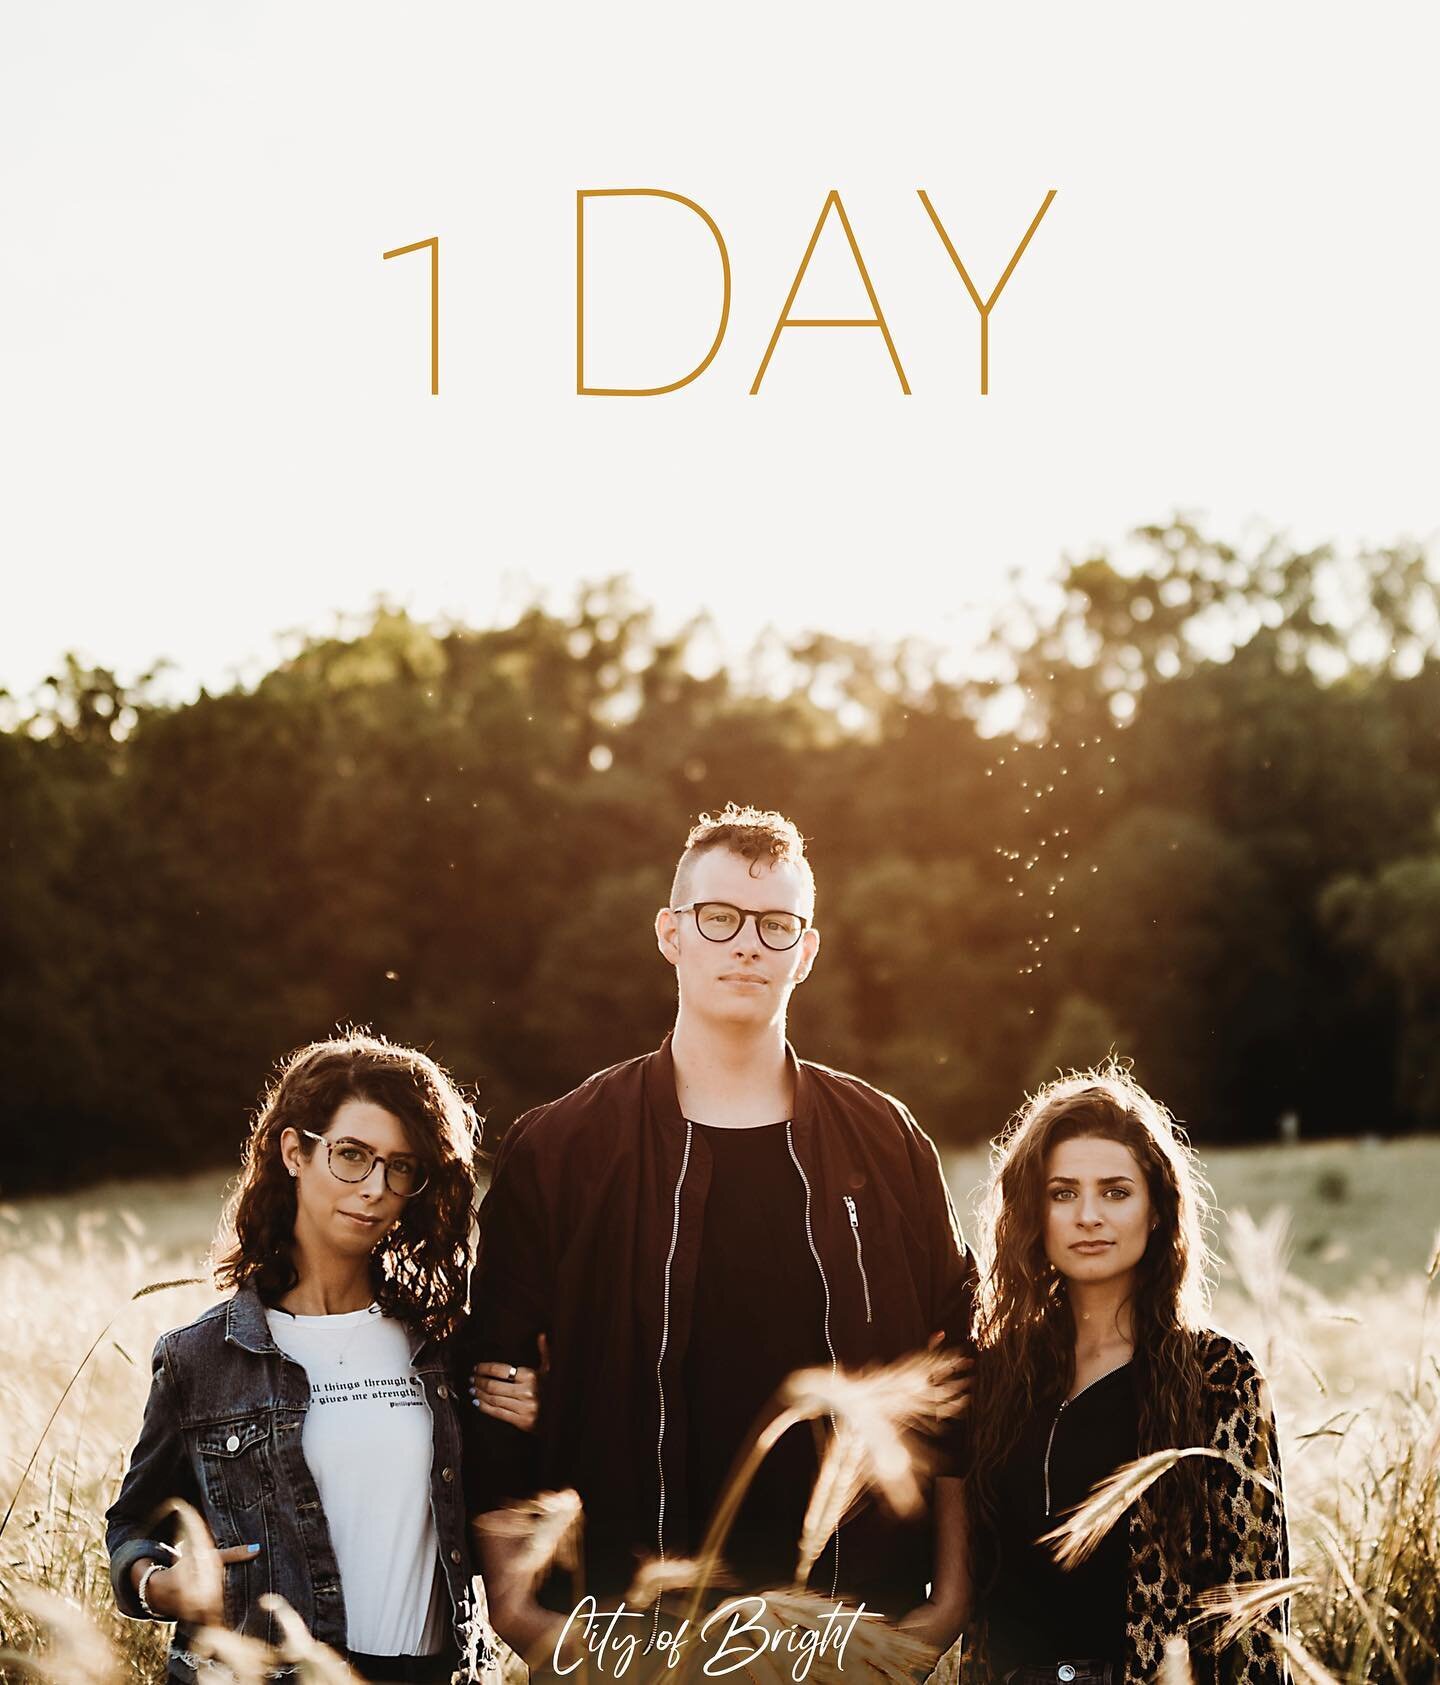 10.1.20 - TOMORROW is the day!!! 💛 We are so excited for you all to hear this song. It has a story, and we are praying it encourages your faith! Exciting things coming with the release... stay tuned!💙 #cityofbright #siblingband #newmusic